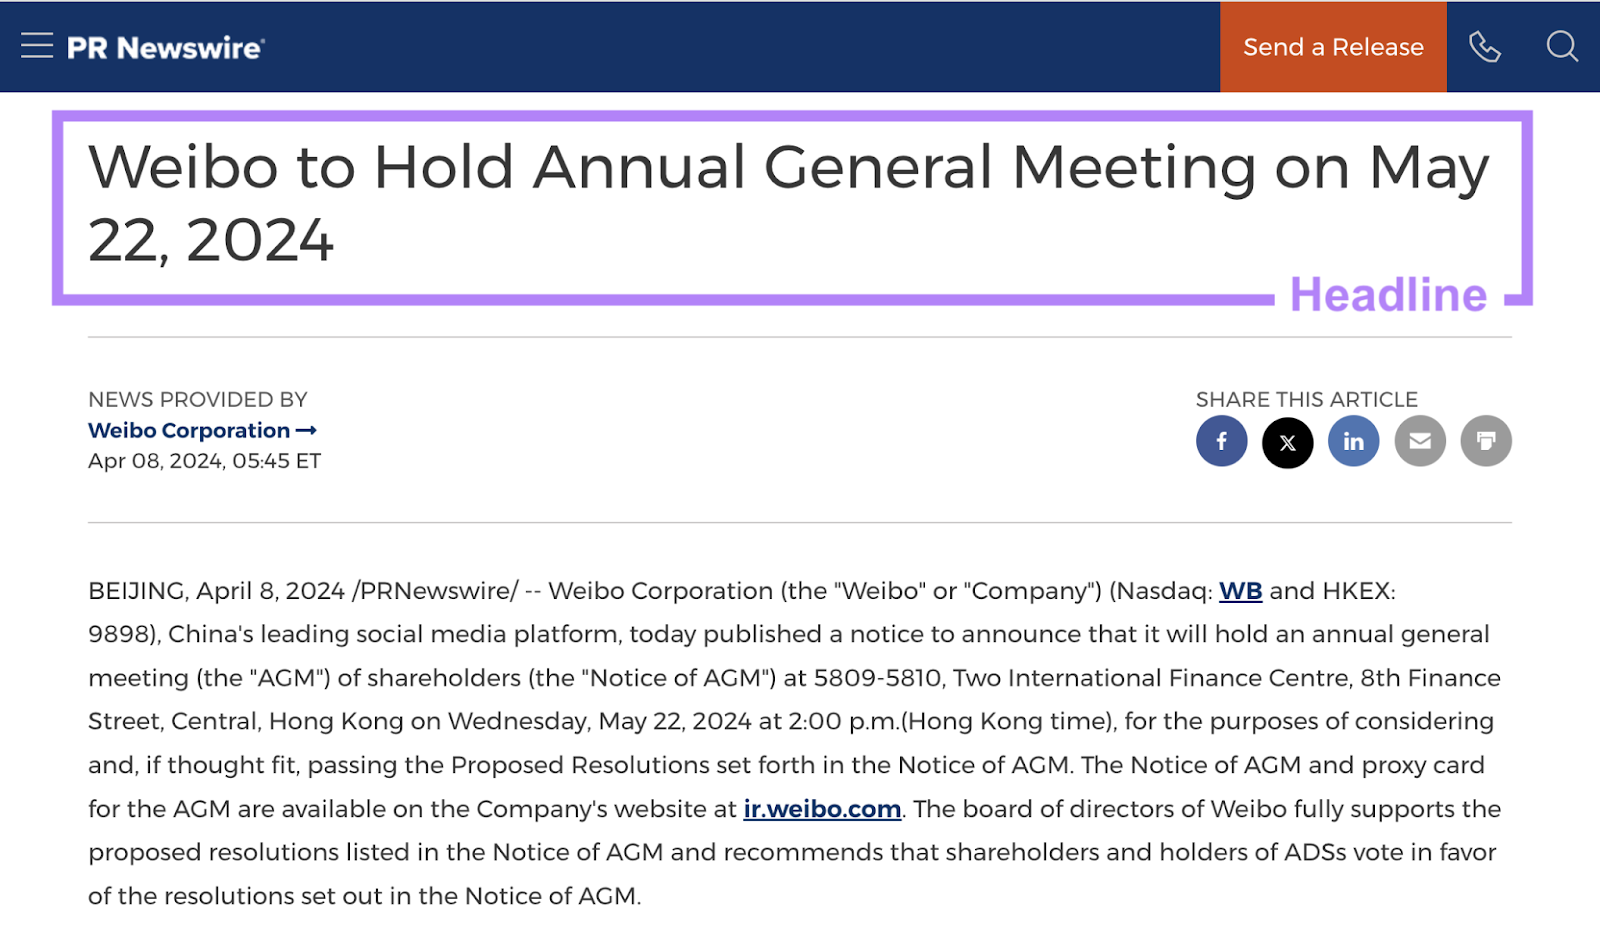 press release headline says "weibo to hold annual general meeting on may 22, 2024"